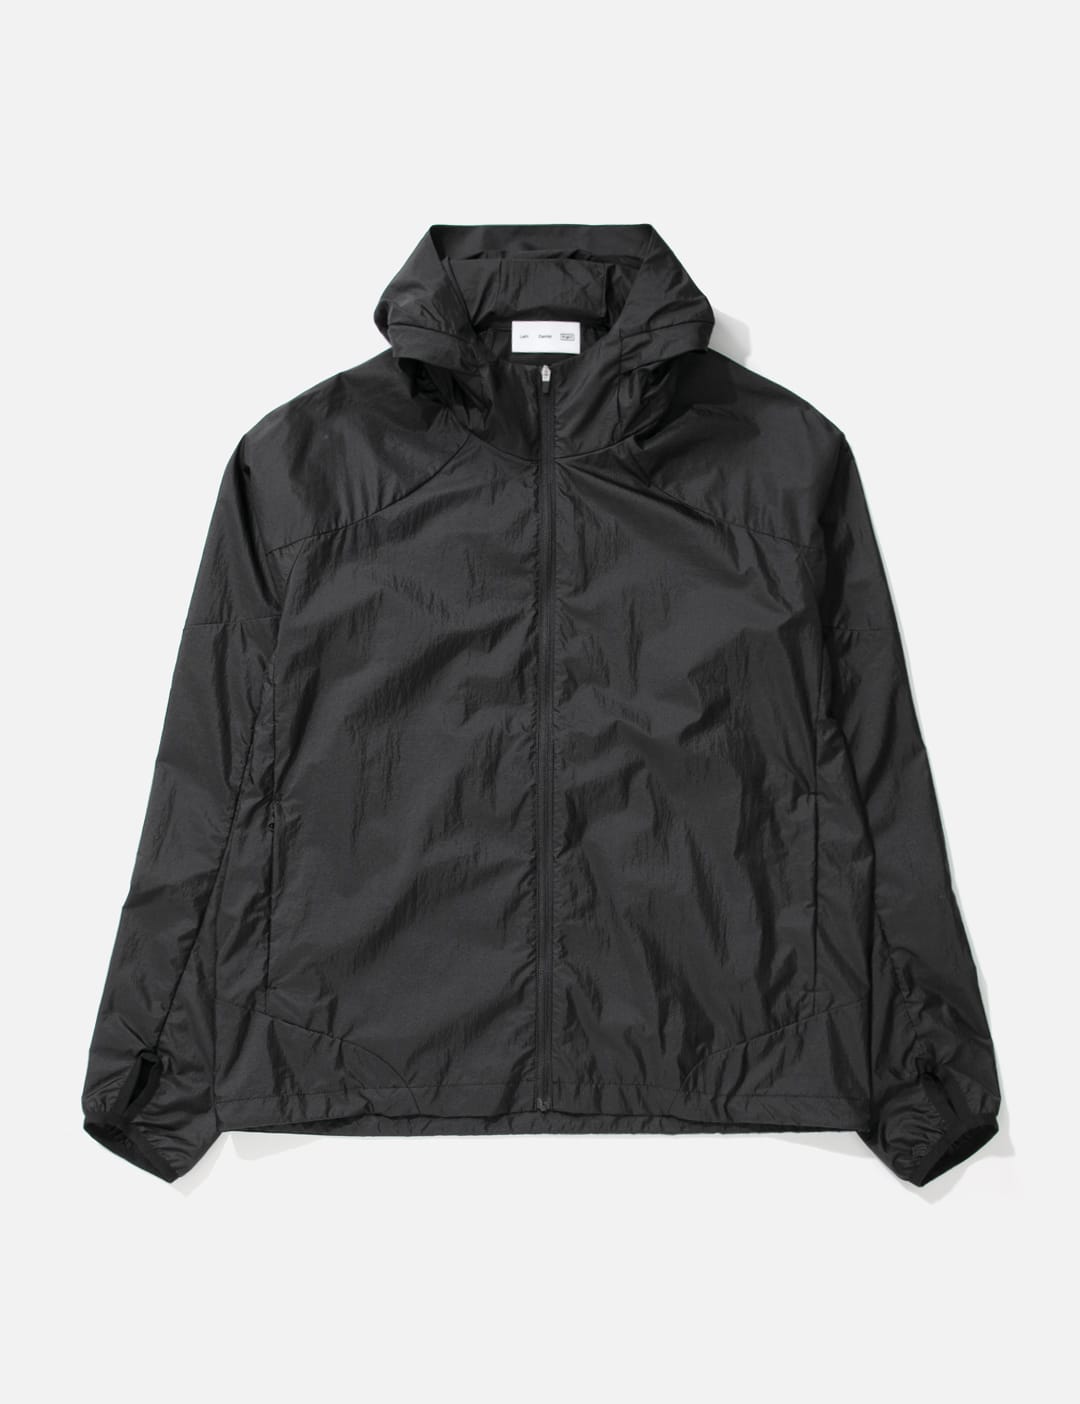 Human Made - DRIZZLER JACKET | HBX - Globally Curated Fashion and 